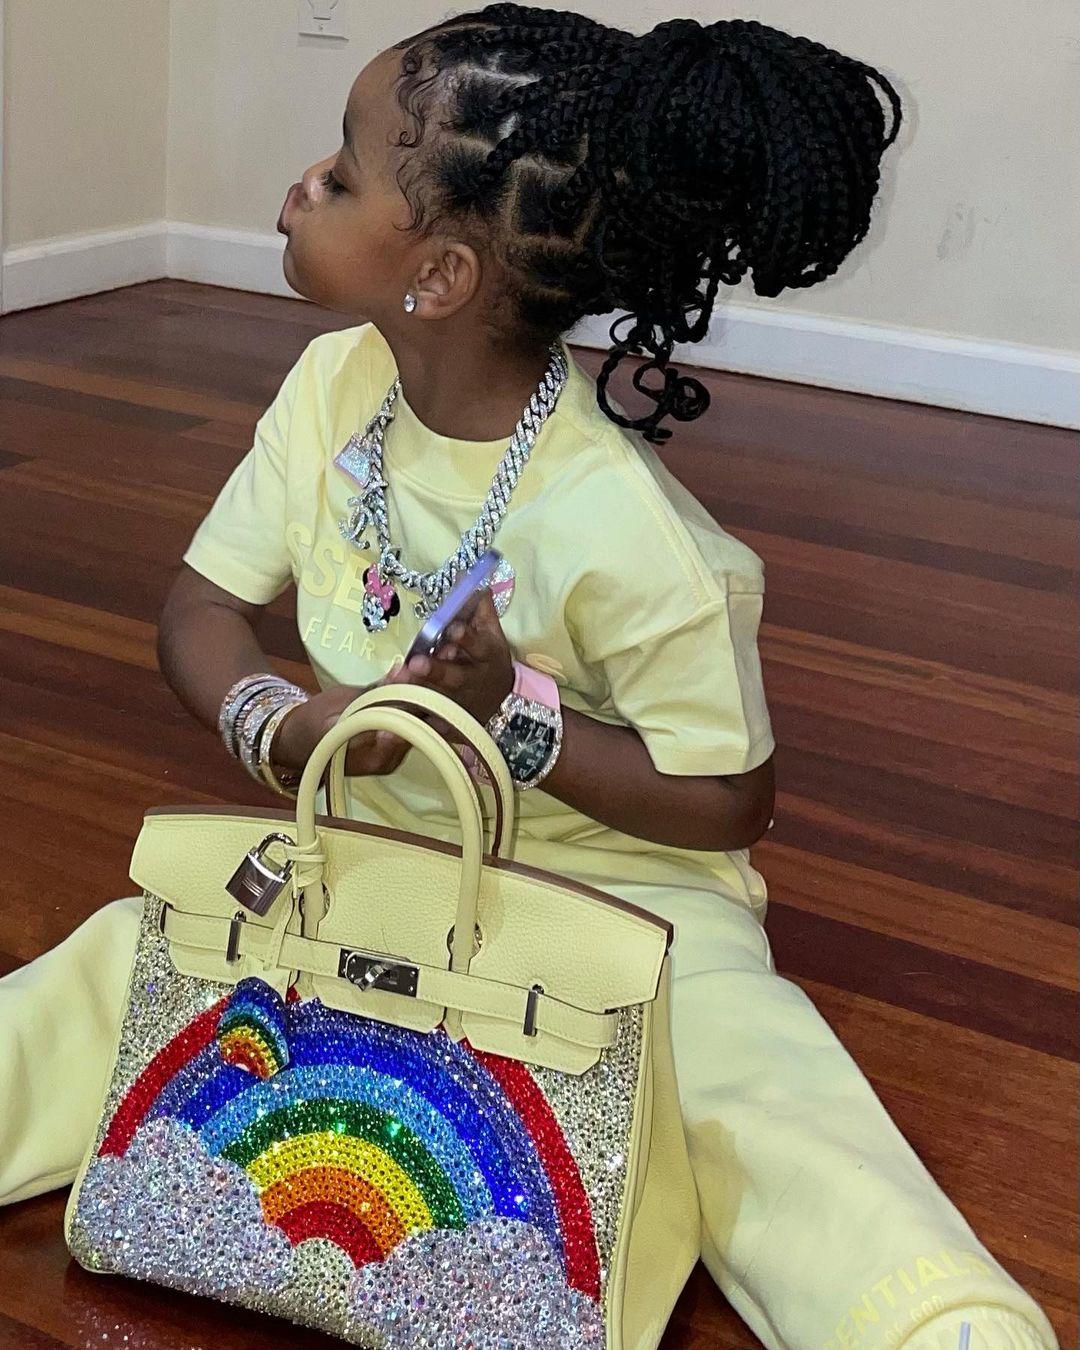 Cardi B Gives 3-Year-Old Daughter A Bedazzled $50,000 Handbag!